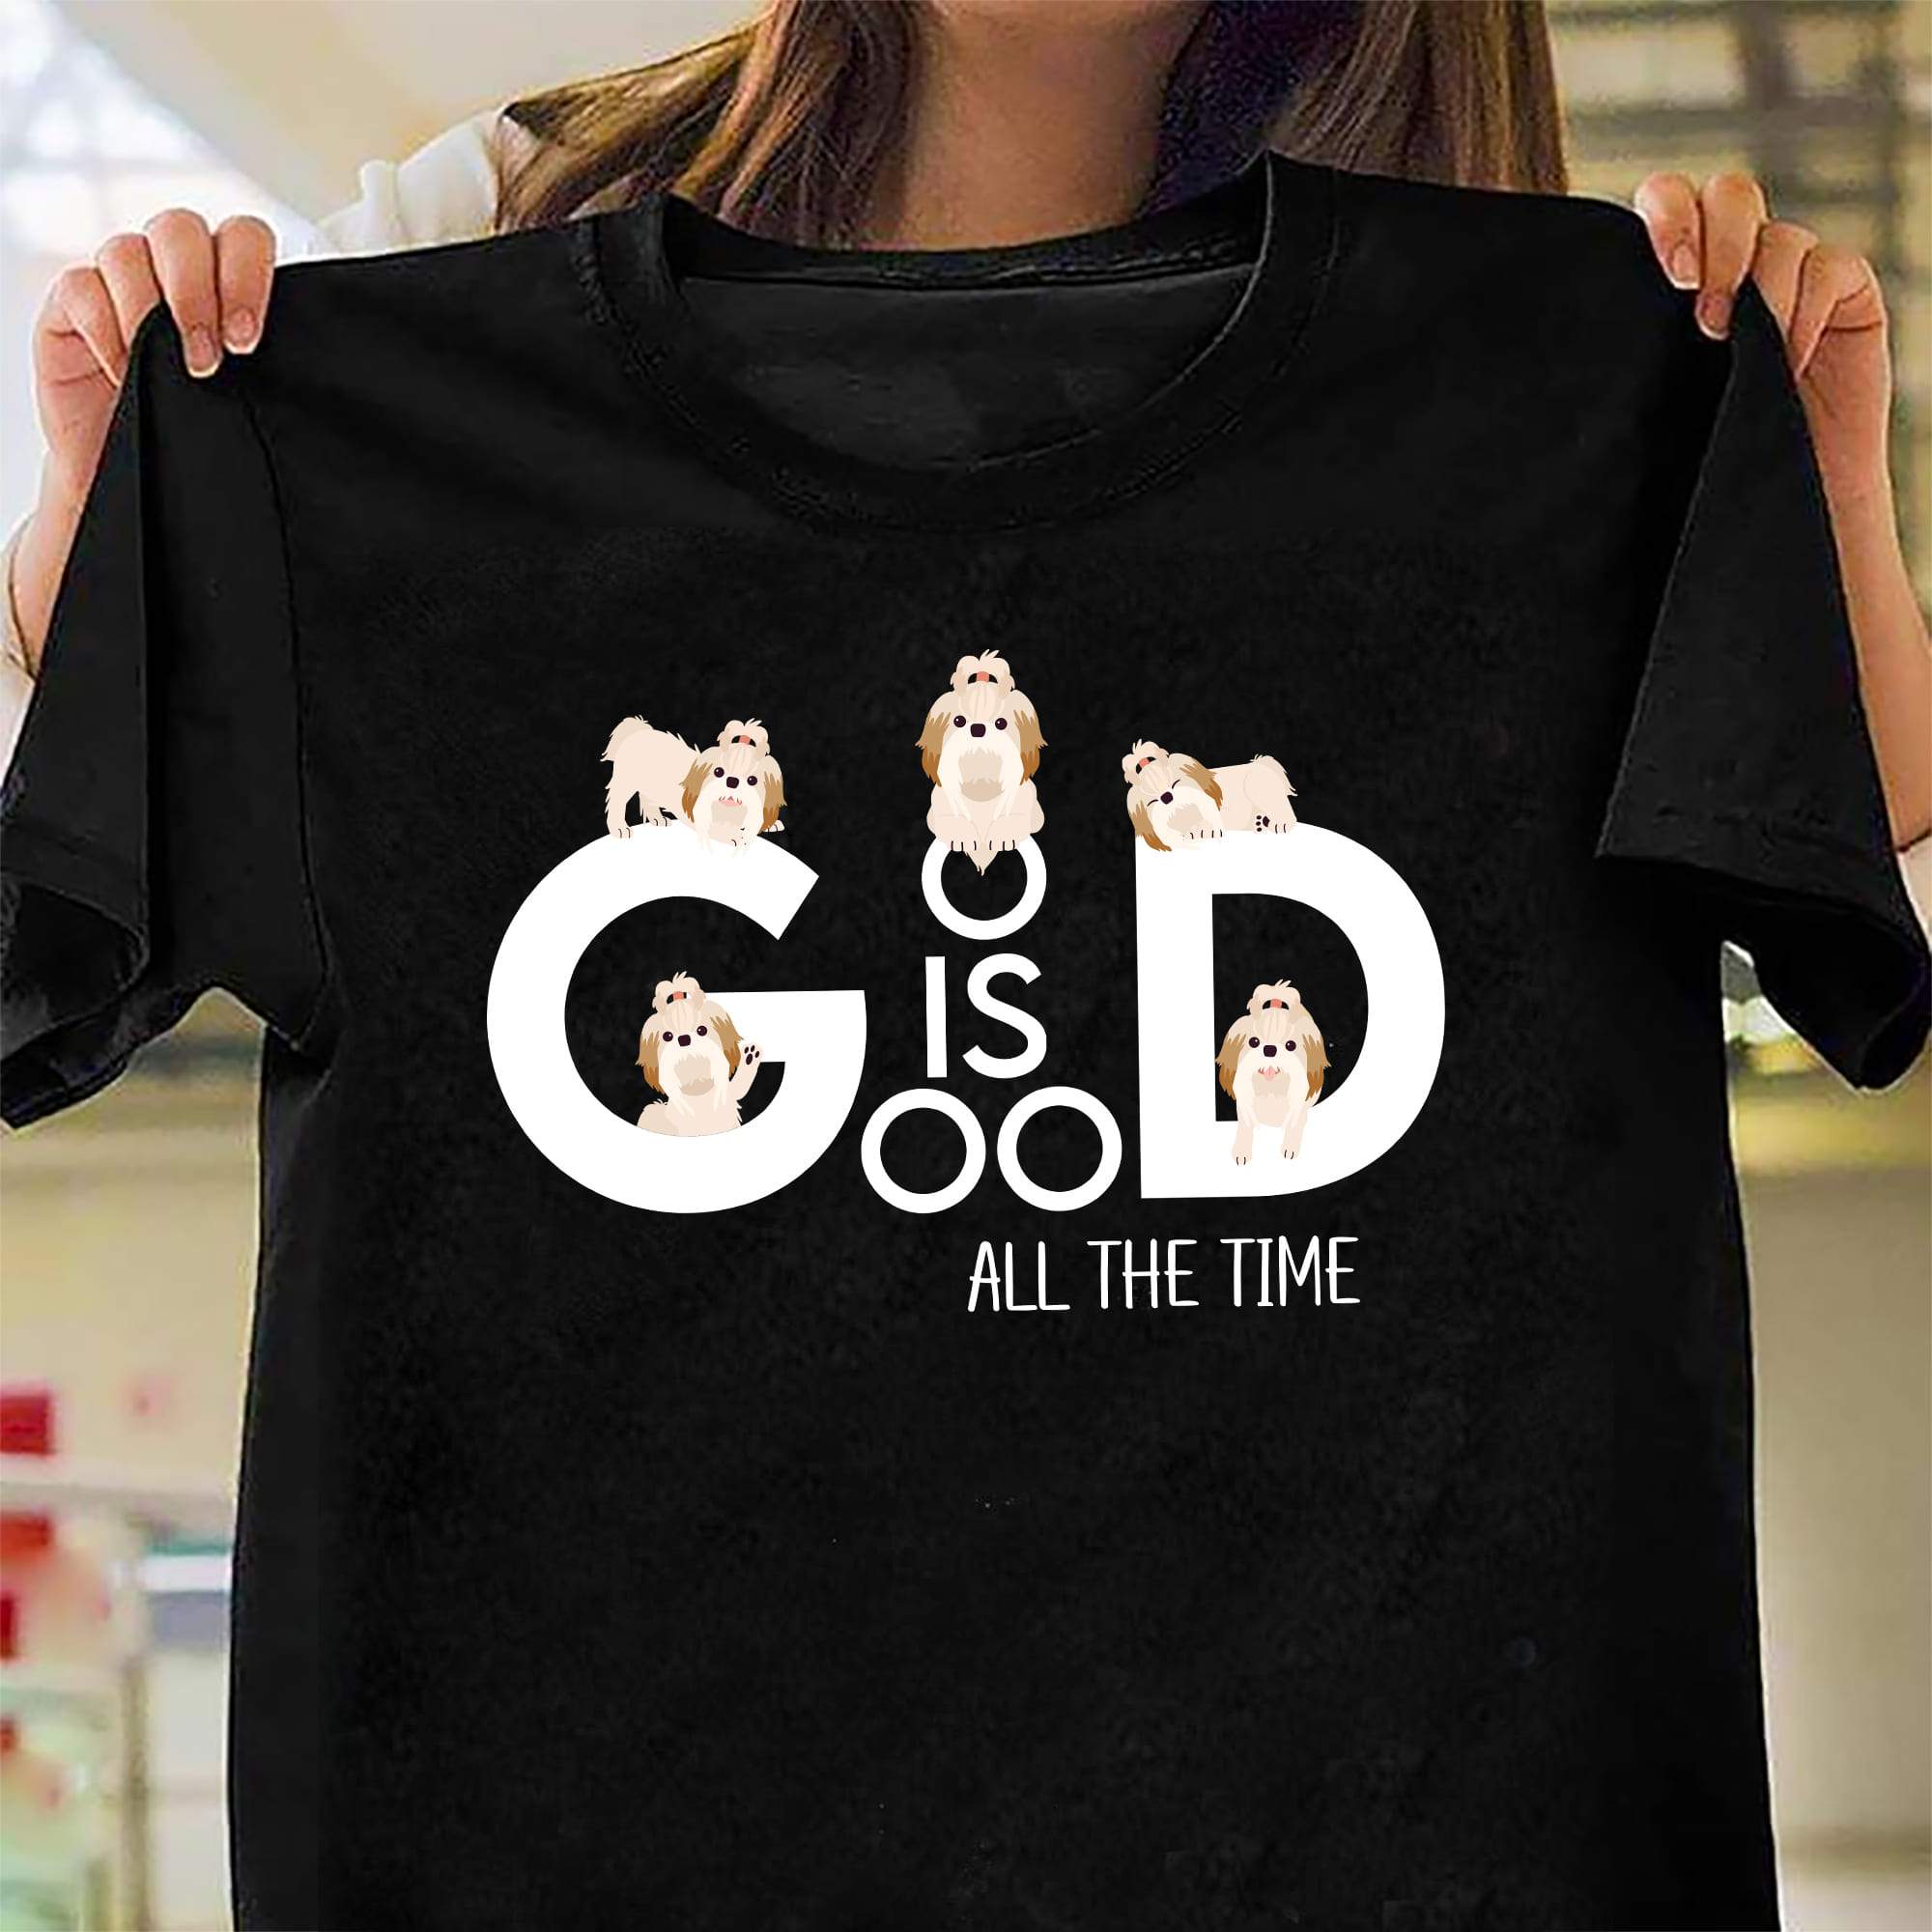 Shih Tzu, God is good all the time – T Shirt